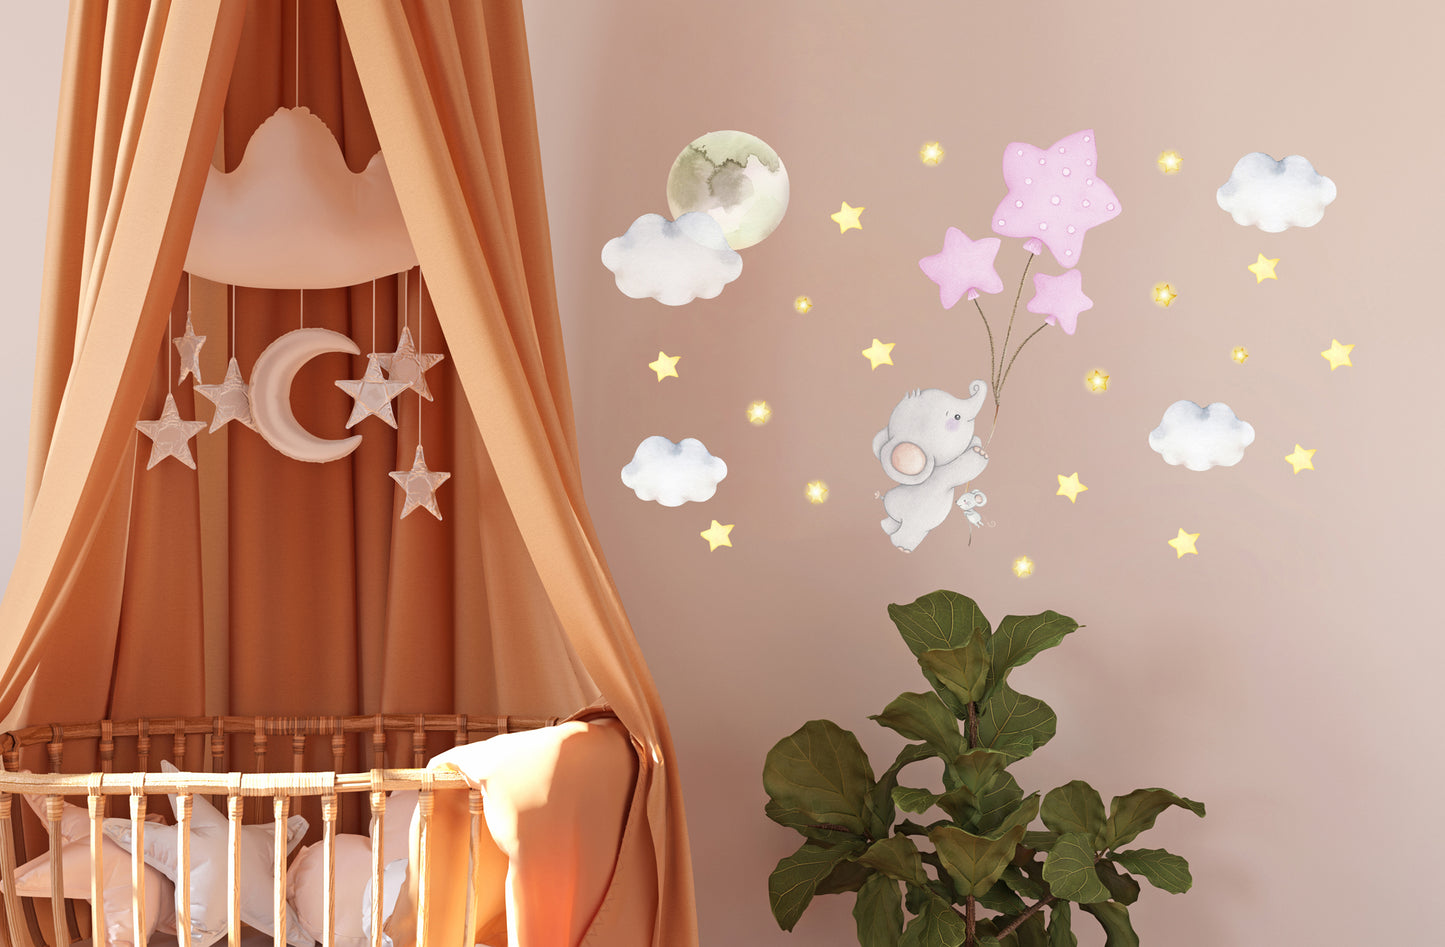 Elephant and balloons. Small wall decals for baby's room. Clouds and gold stars.